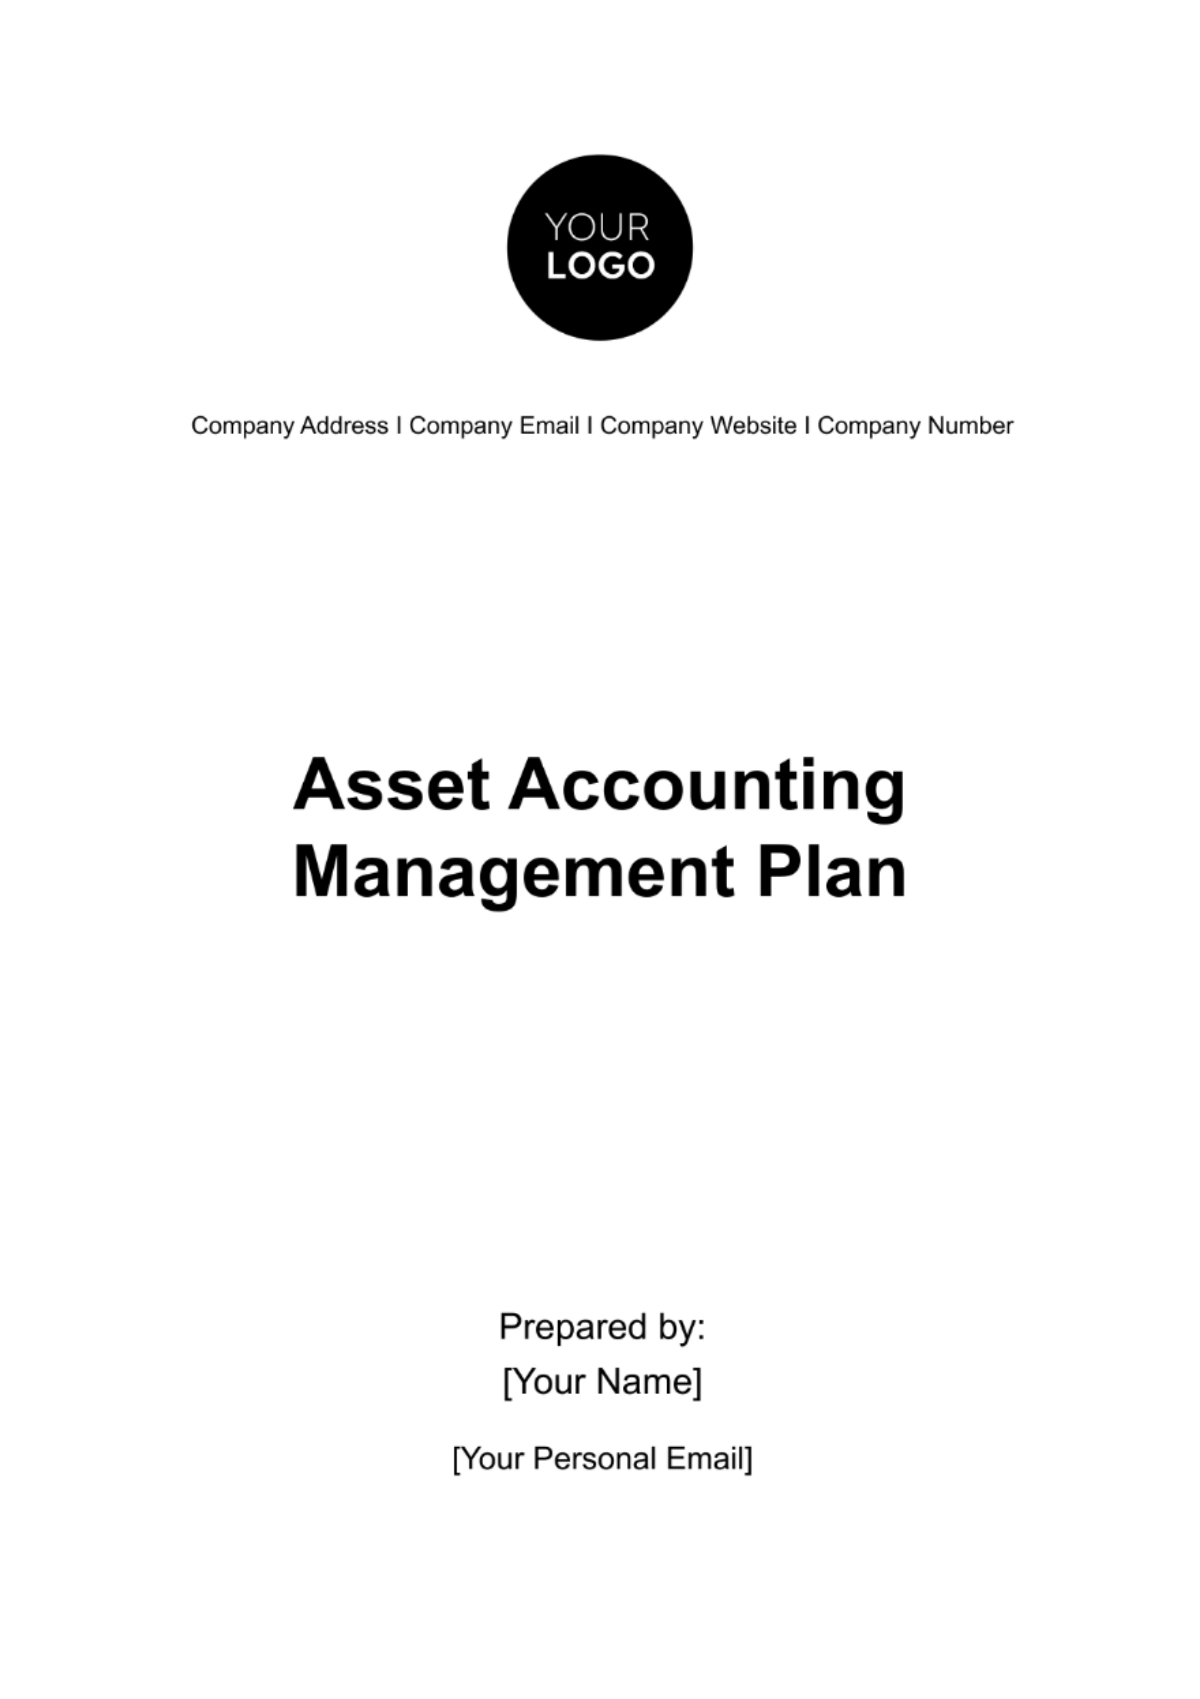 Asset Accounting Management Plan Template